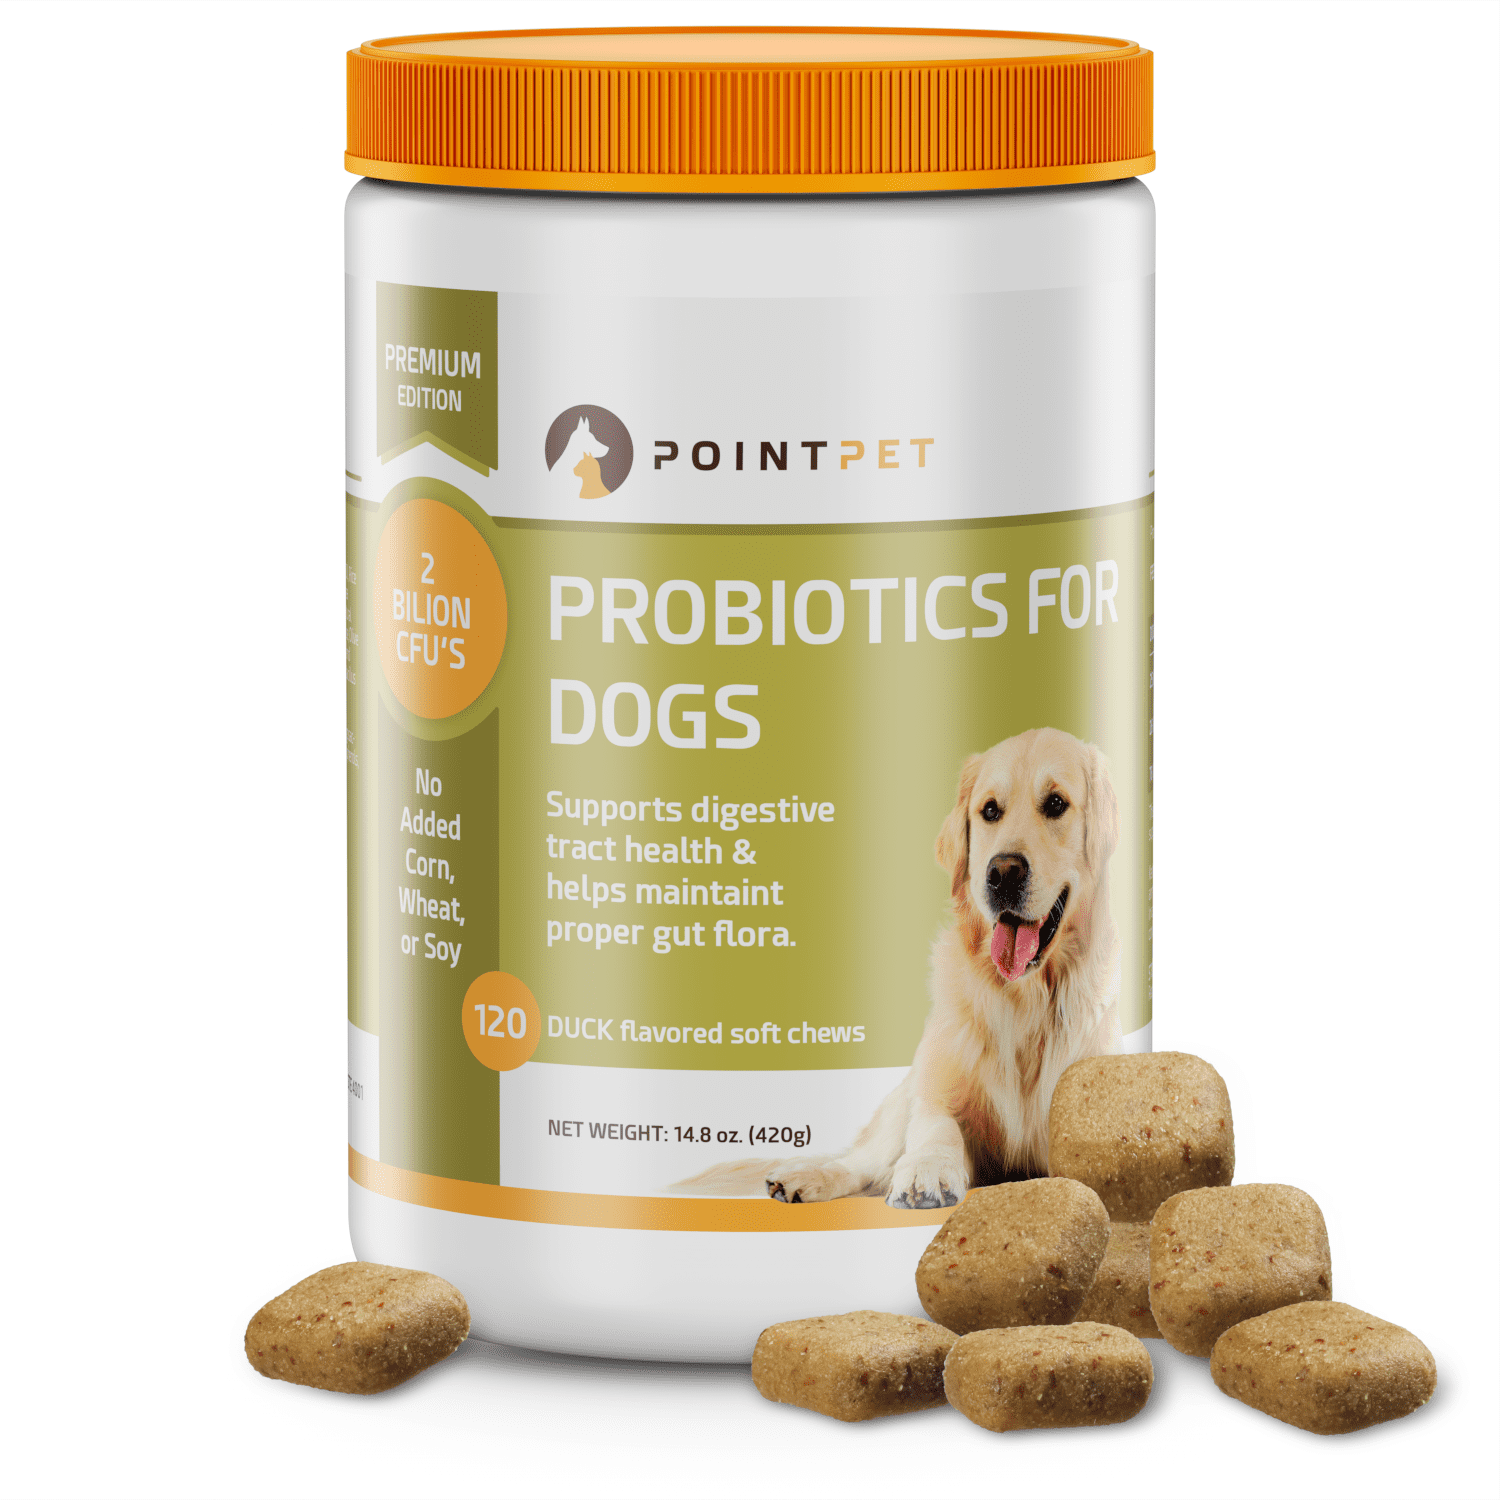 POINTPET Probiotics for Dogs - Natural Probiotic Supplement with Prebiotics,  Relief from Diarrhea, Dry and Itchy Skin, Gas, Constipation, Allergies -  Digestive and Immune Support, 120 Soft Chews 